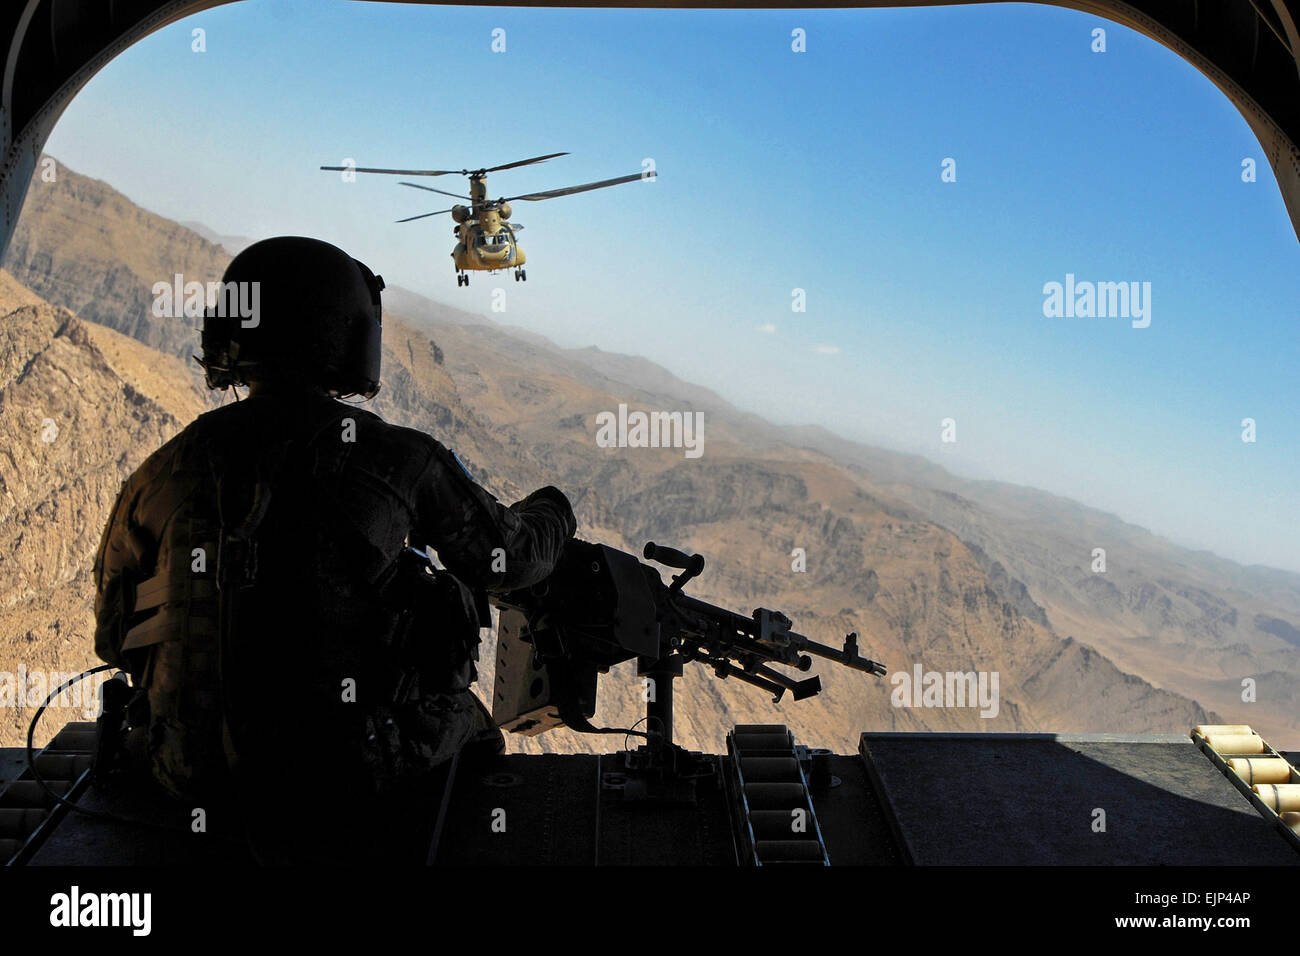 Sgt. Zach Smola, rear door gunner on a CH-47, keeps watch on the mountains in Uruzgan province, Afghanistan, May 12, 2013. The Chinooks, operated by members of Bravo Company, 2nd Battalion, 104th Aviation Regiment from the Connecticut and Pennsylvania Army National Guard, have played a vital part in the mission in Afghanistan since their arrival in December 2012 by performing resupply, retrograde, and planned missions.  Sgt. Jessi Ann McCormick Stock Photo